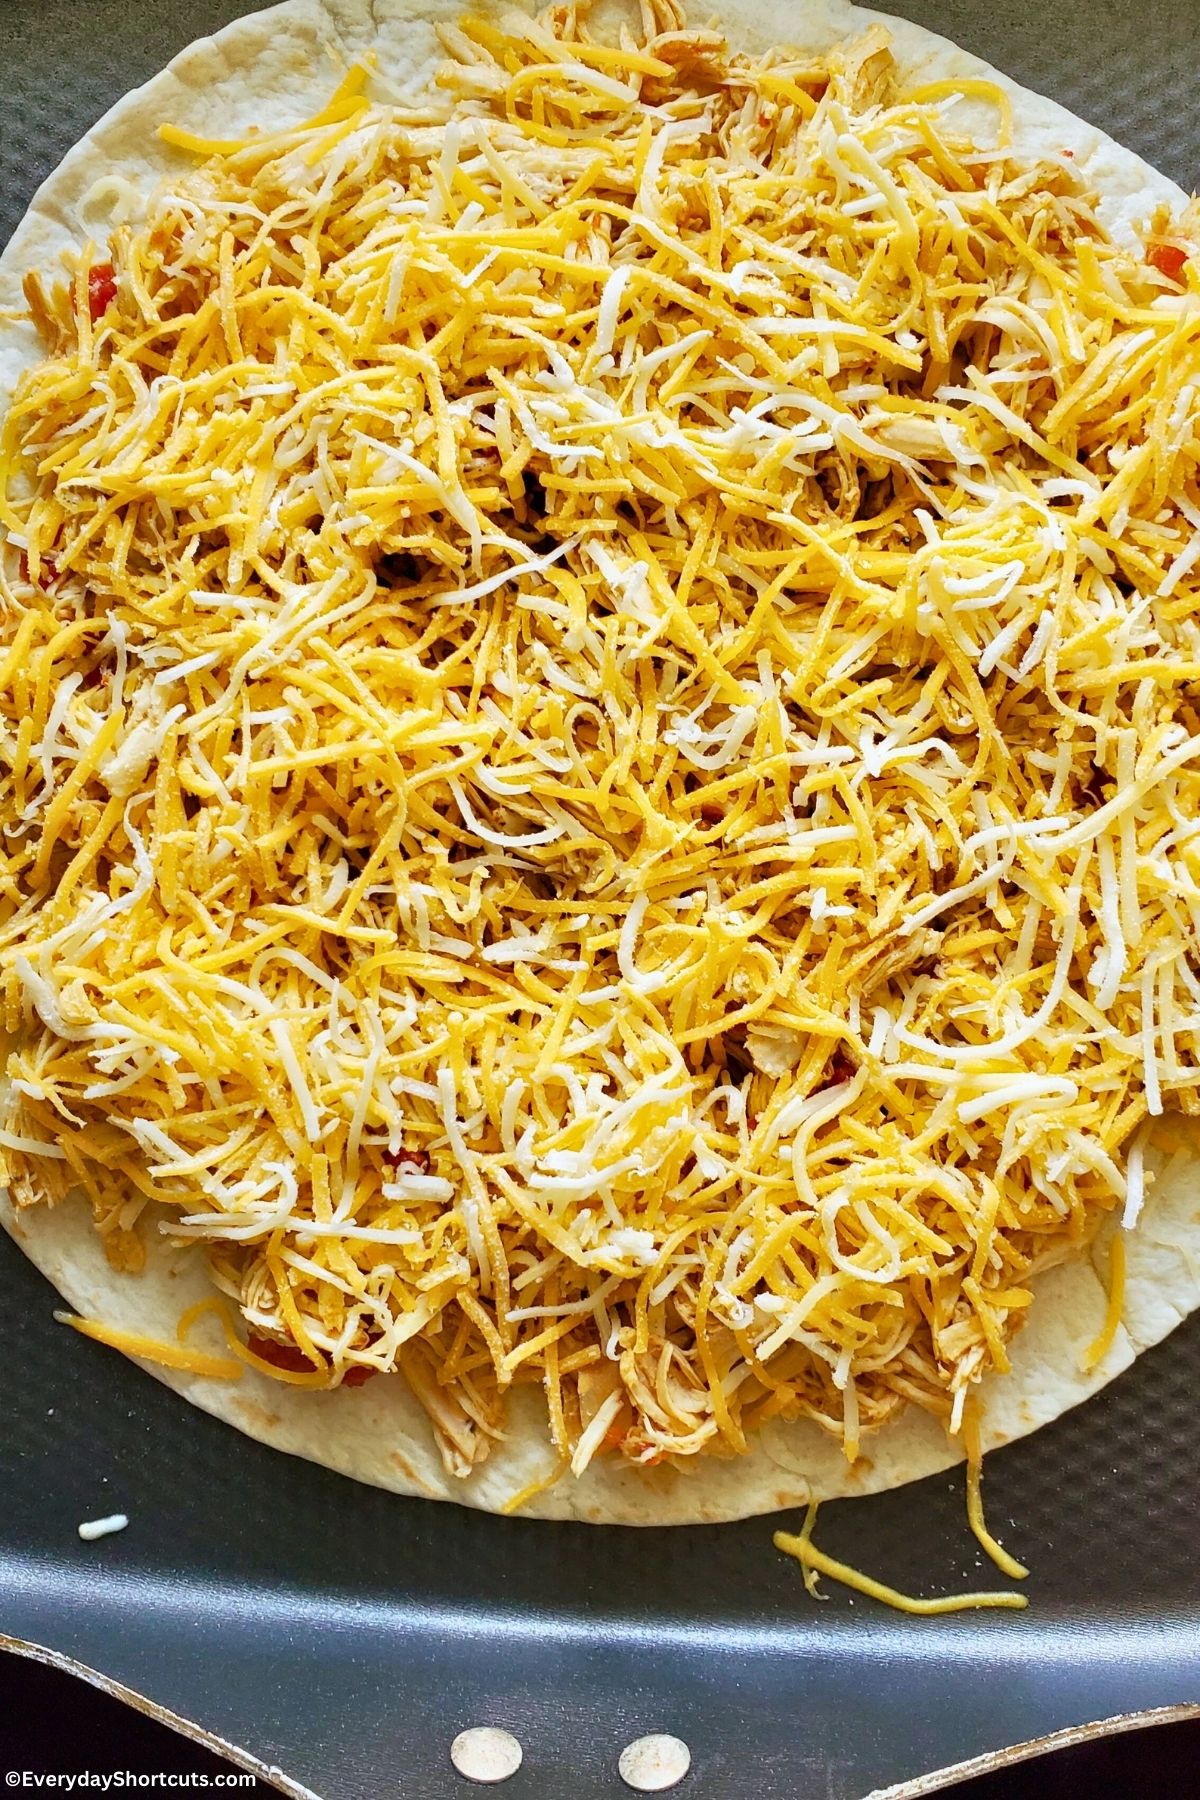 shredded cheese on top of shredded chicken mixture on a tortilla